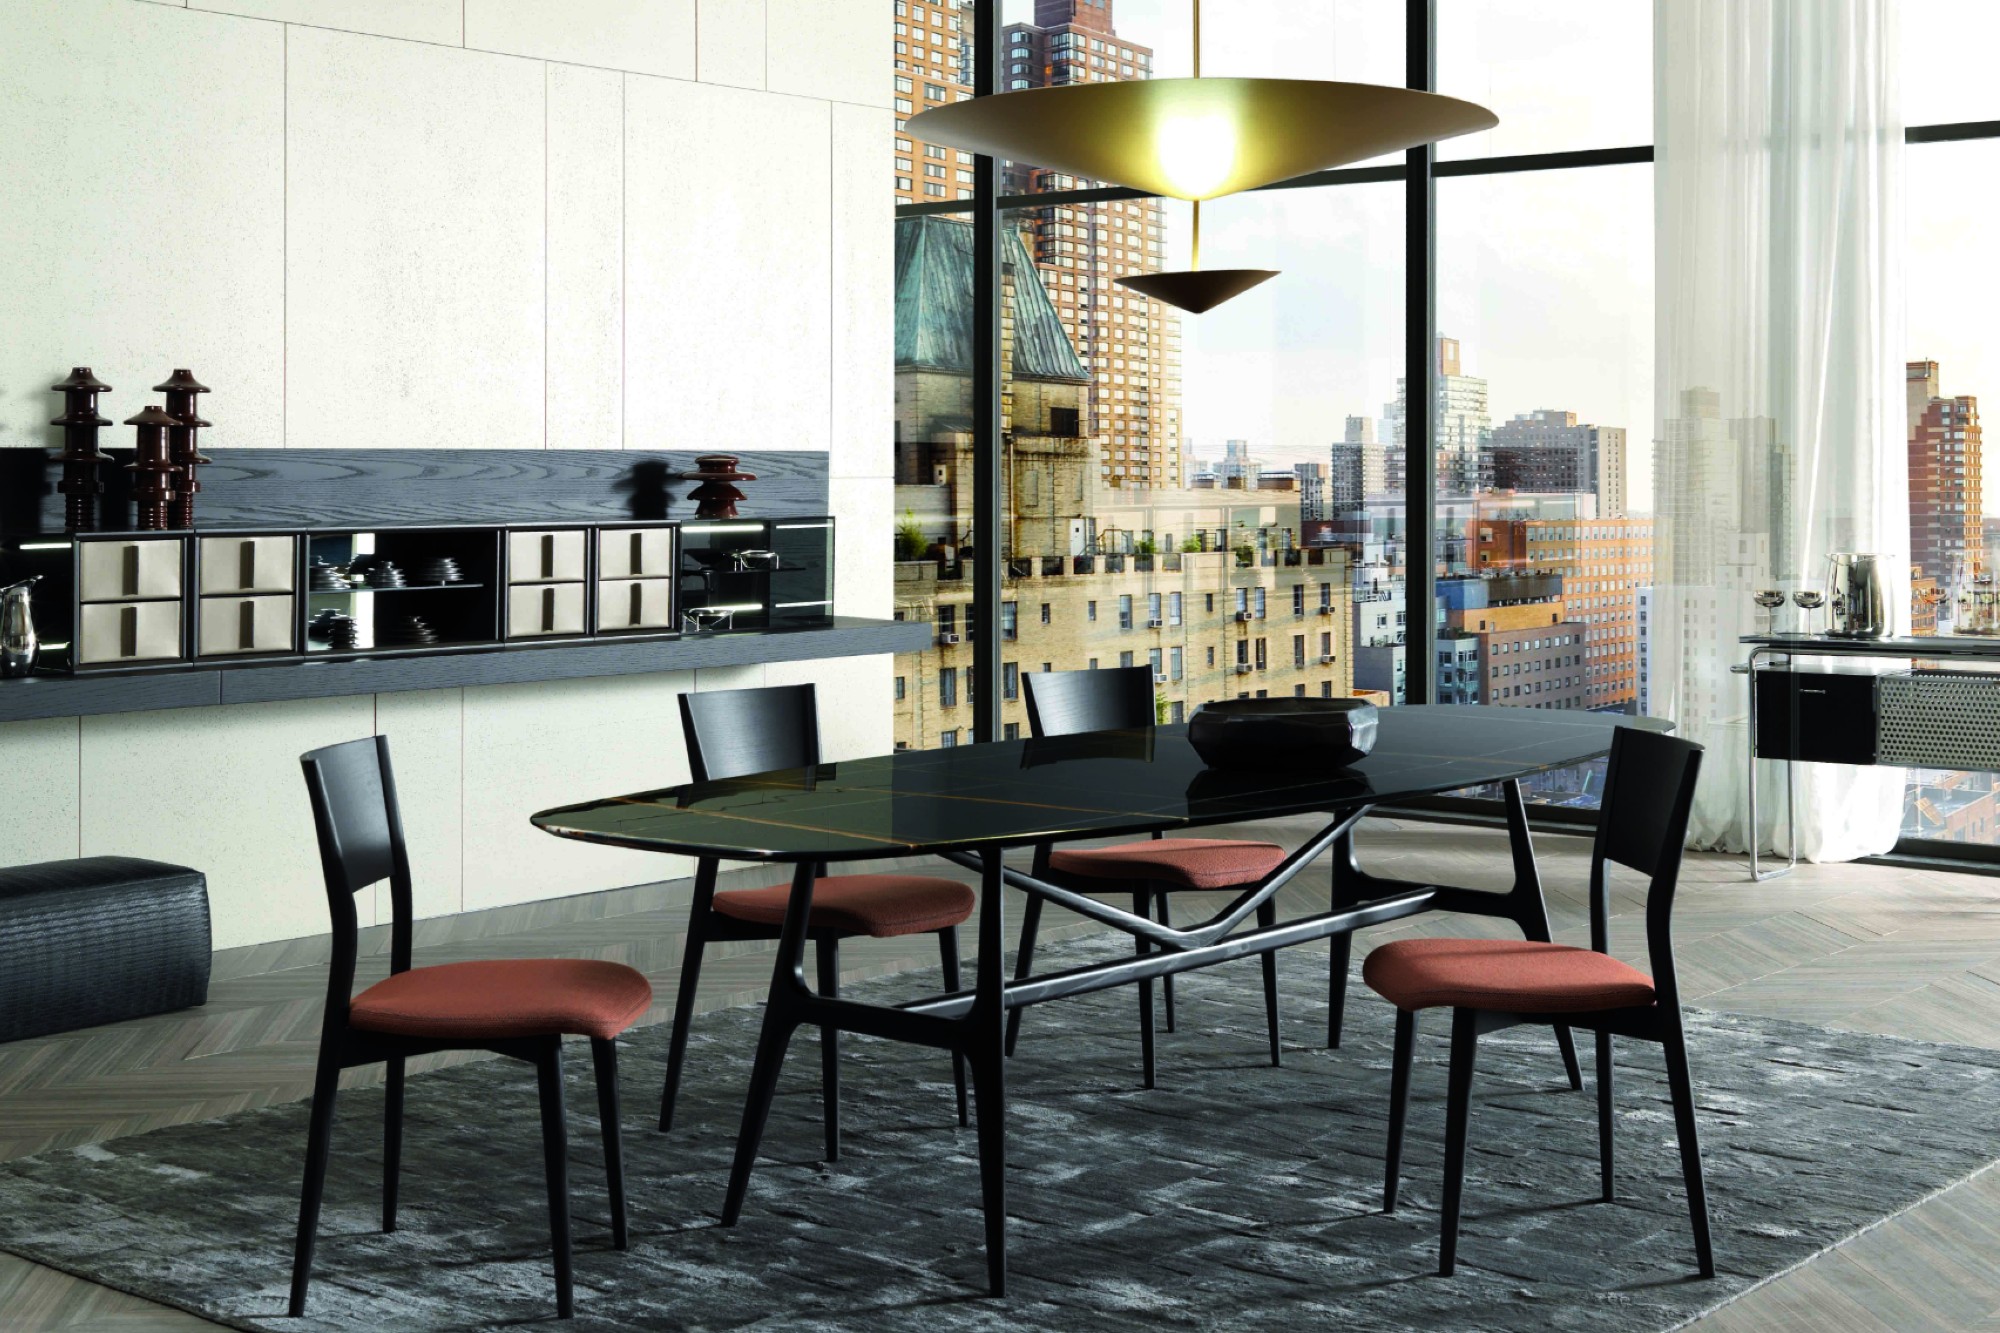 New furniture collection Gaudi by Etreluxe